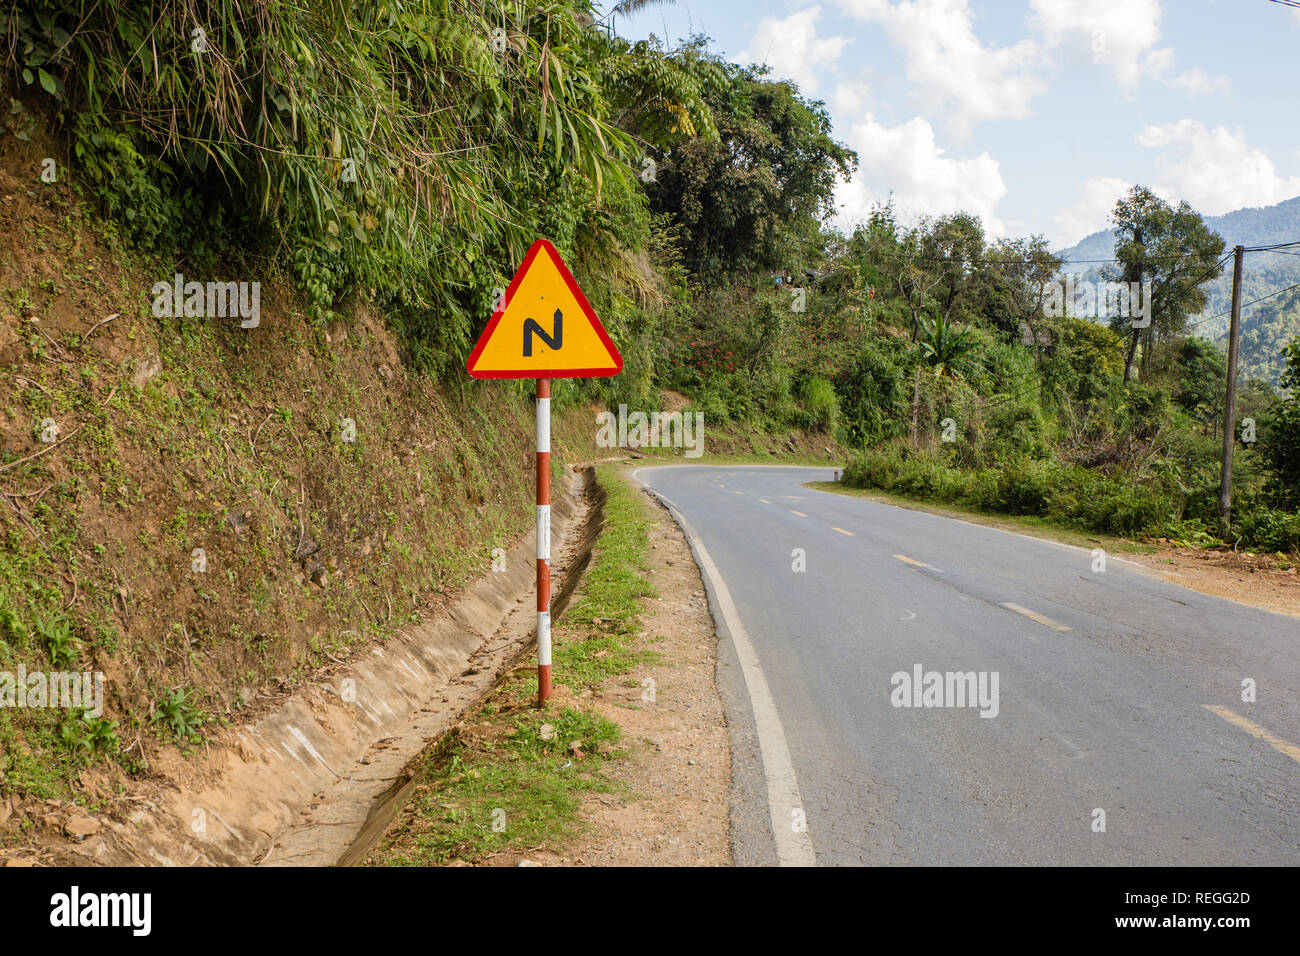 sign winding road on a mountain road, warning traffic sign Vietnam Stock Photo